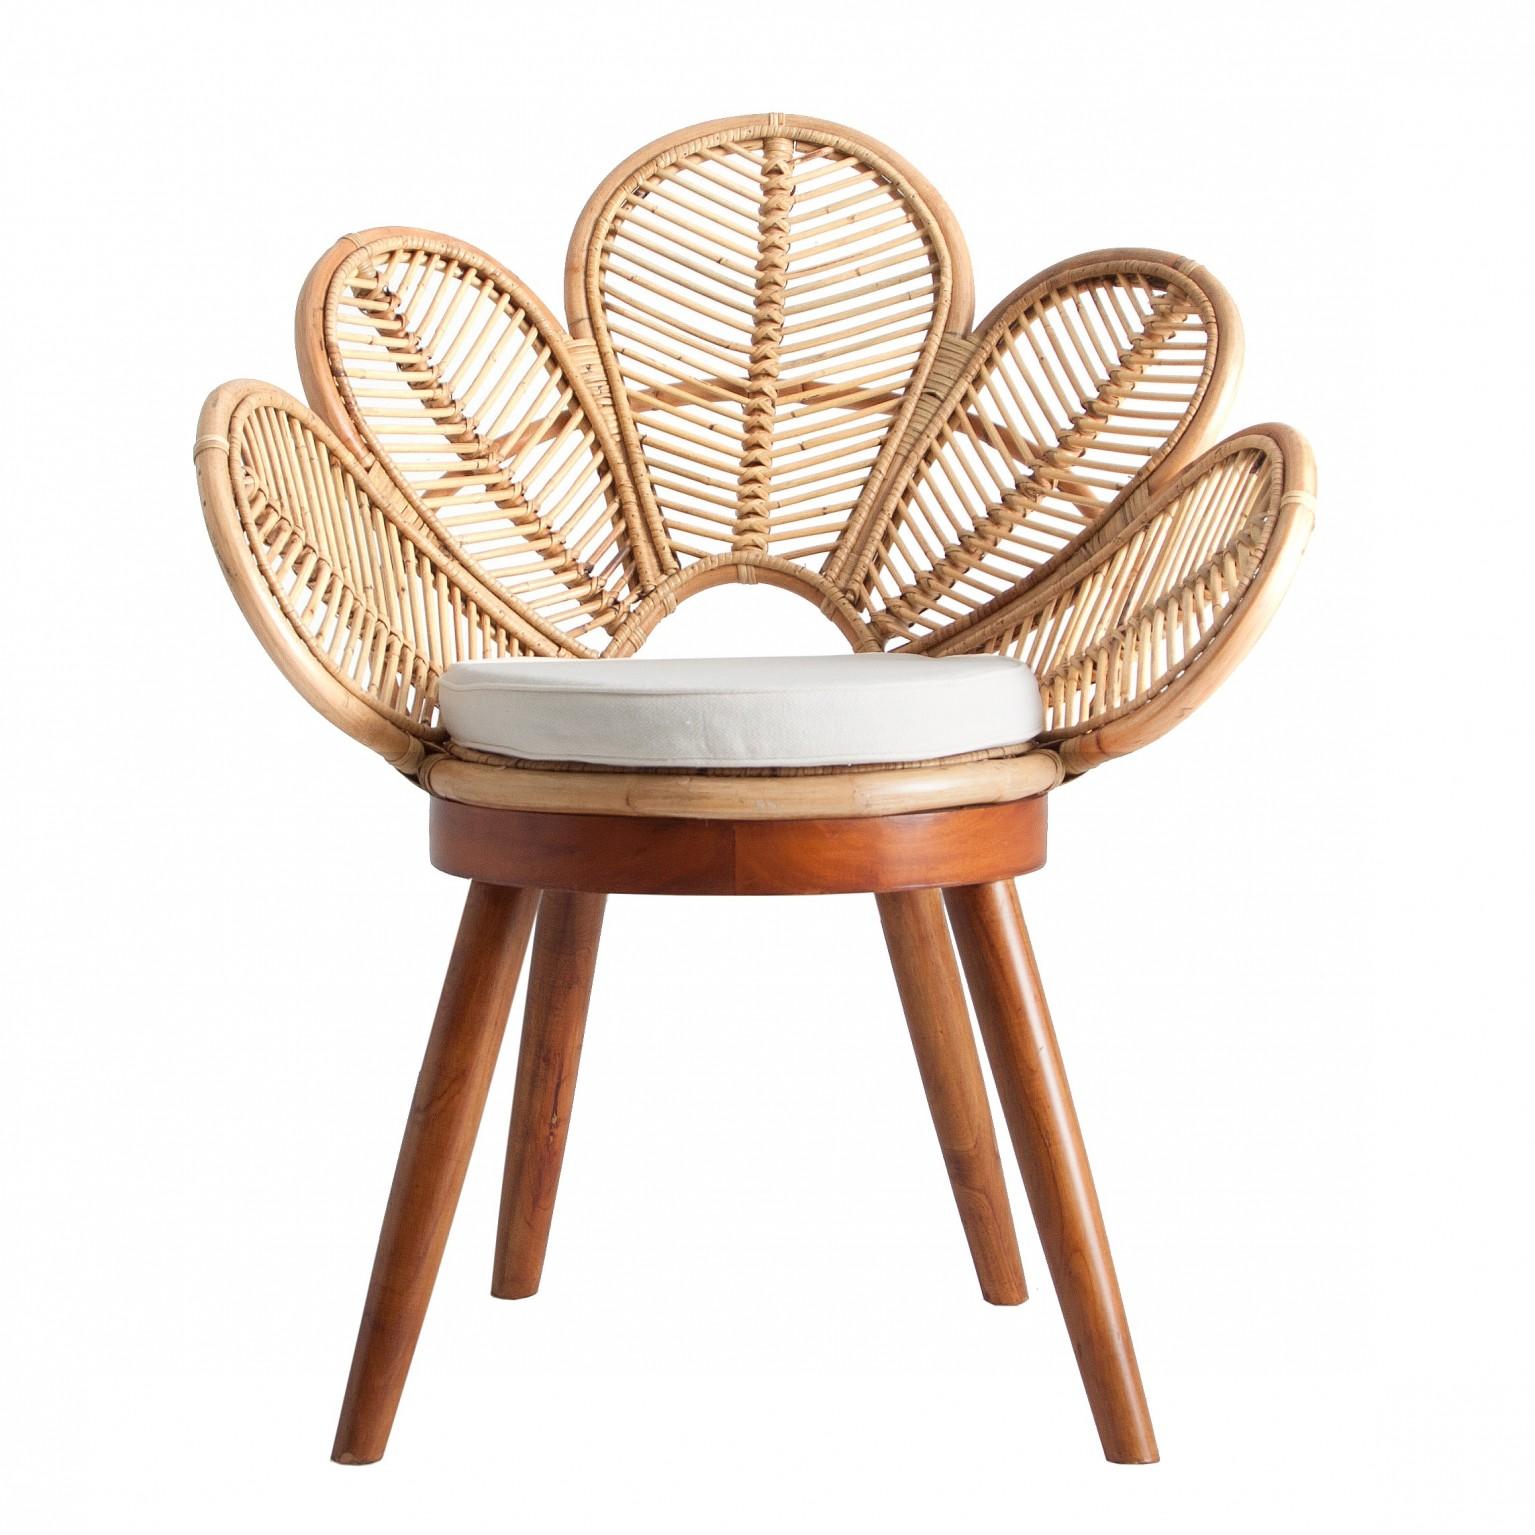 Contemporary Set of Four Mahogany Wood and Rattan Flower Armchairs